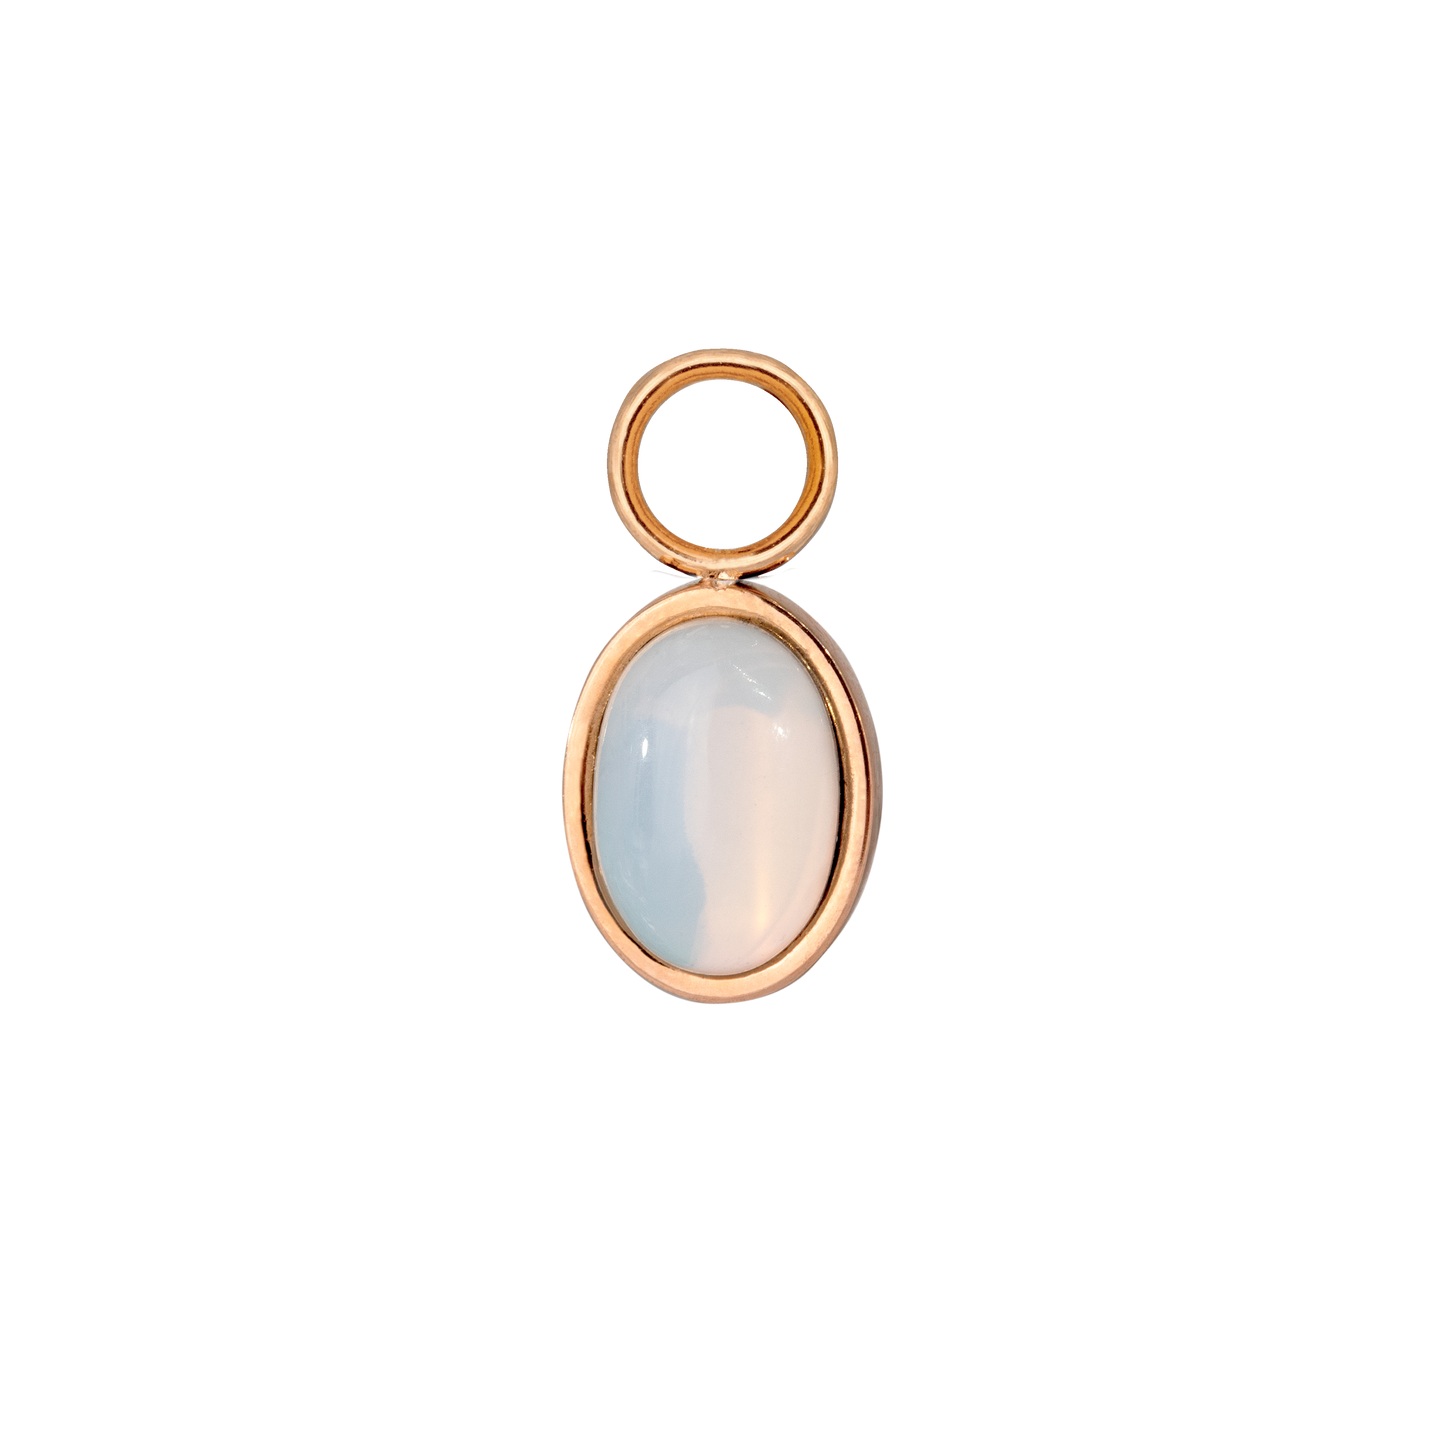 Oval Pendant Twisted Hoop Set Small Roségold